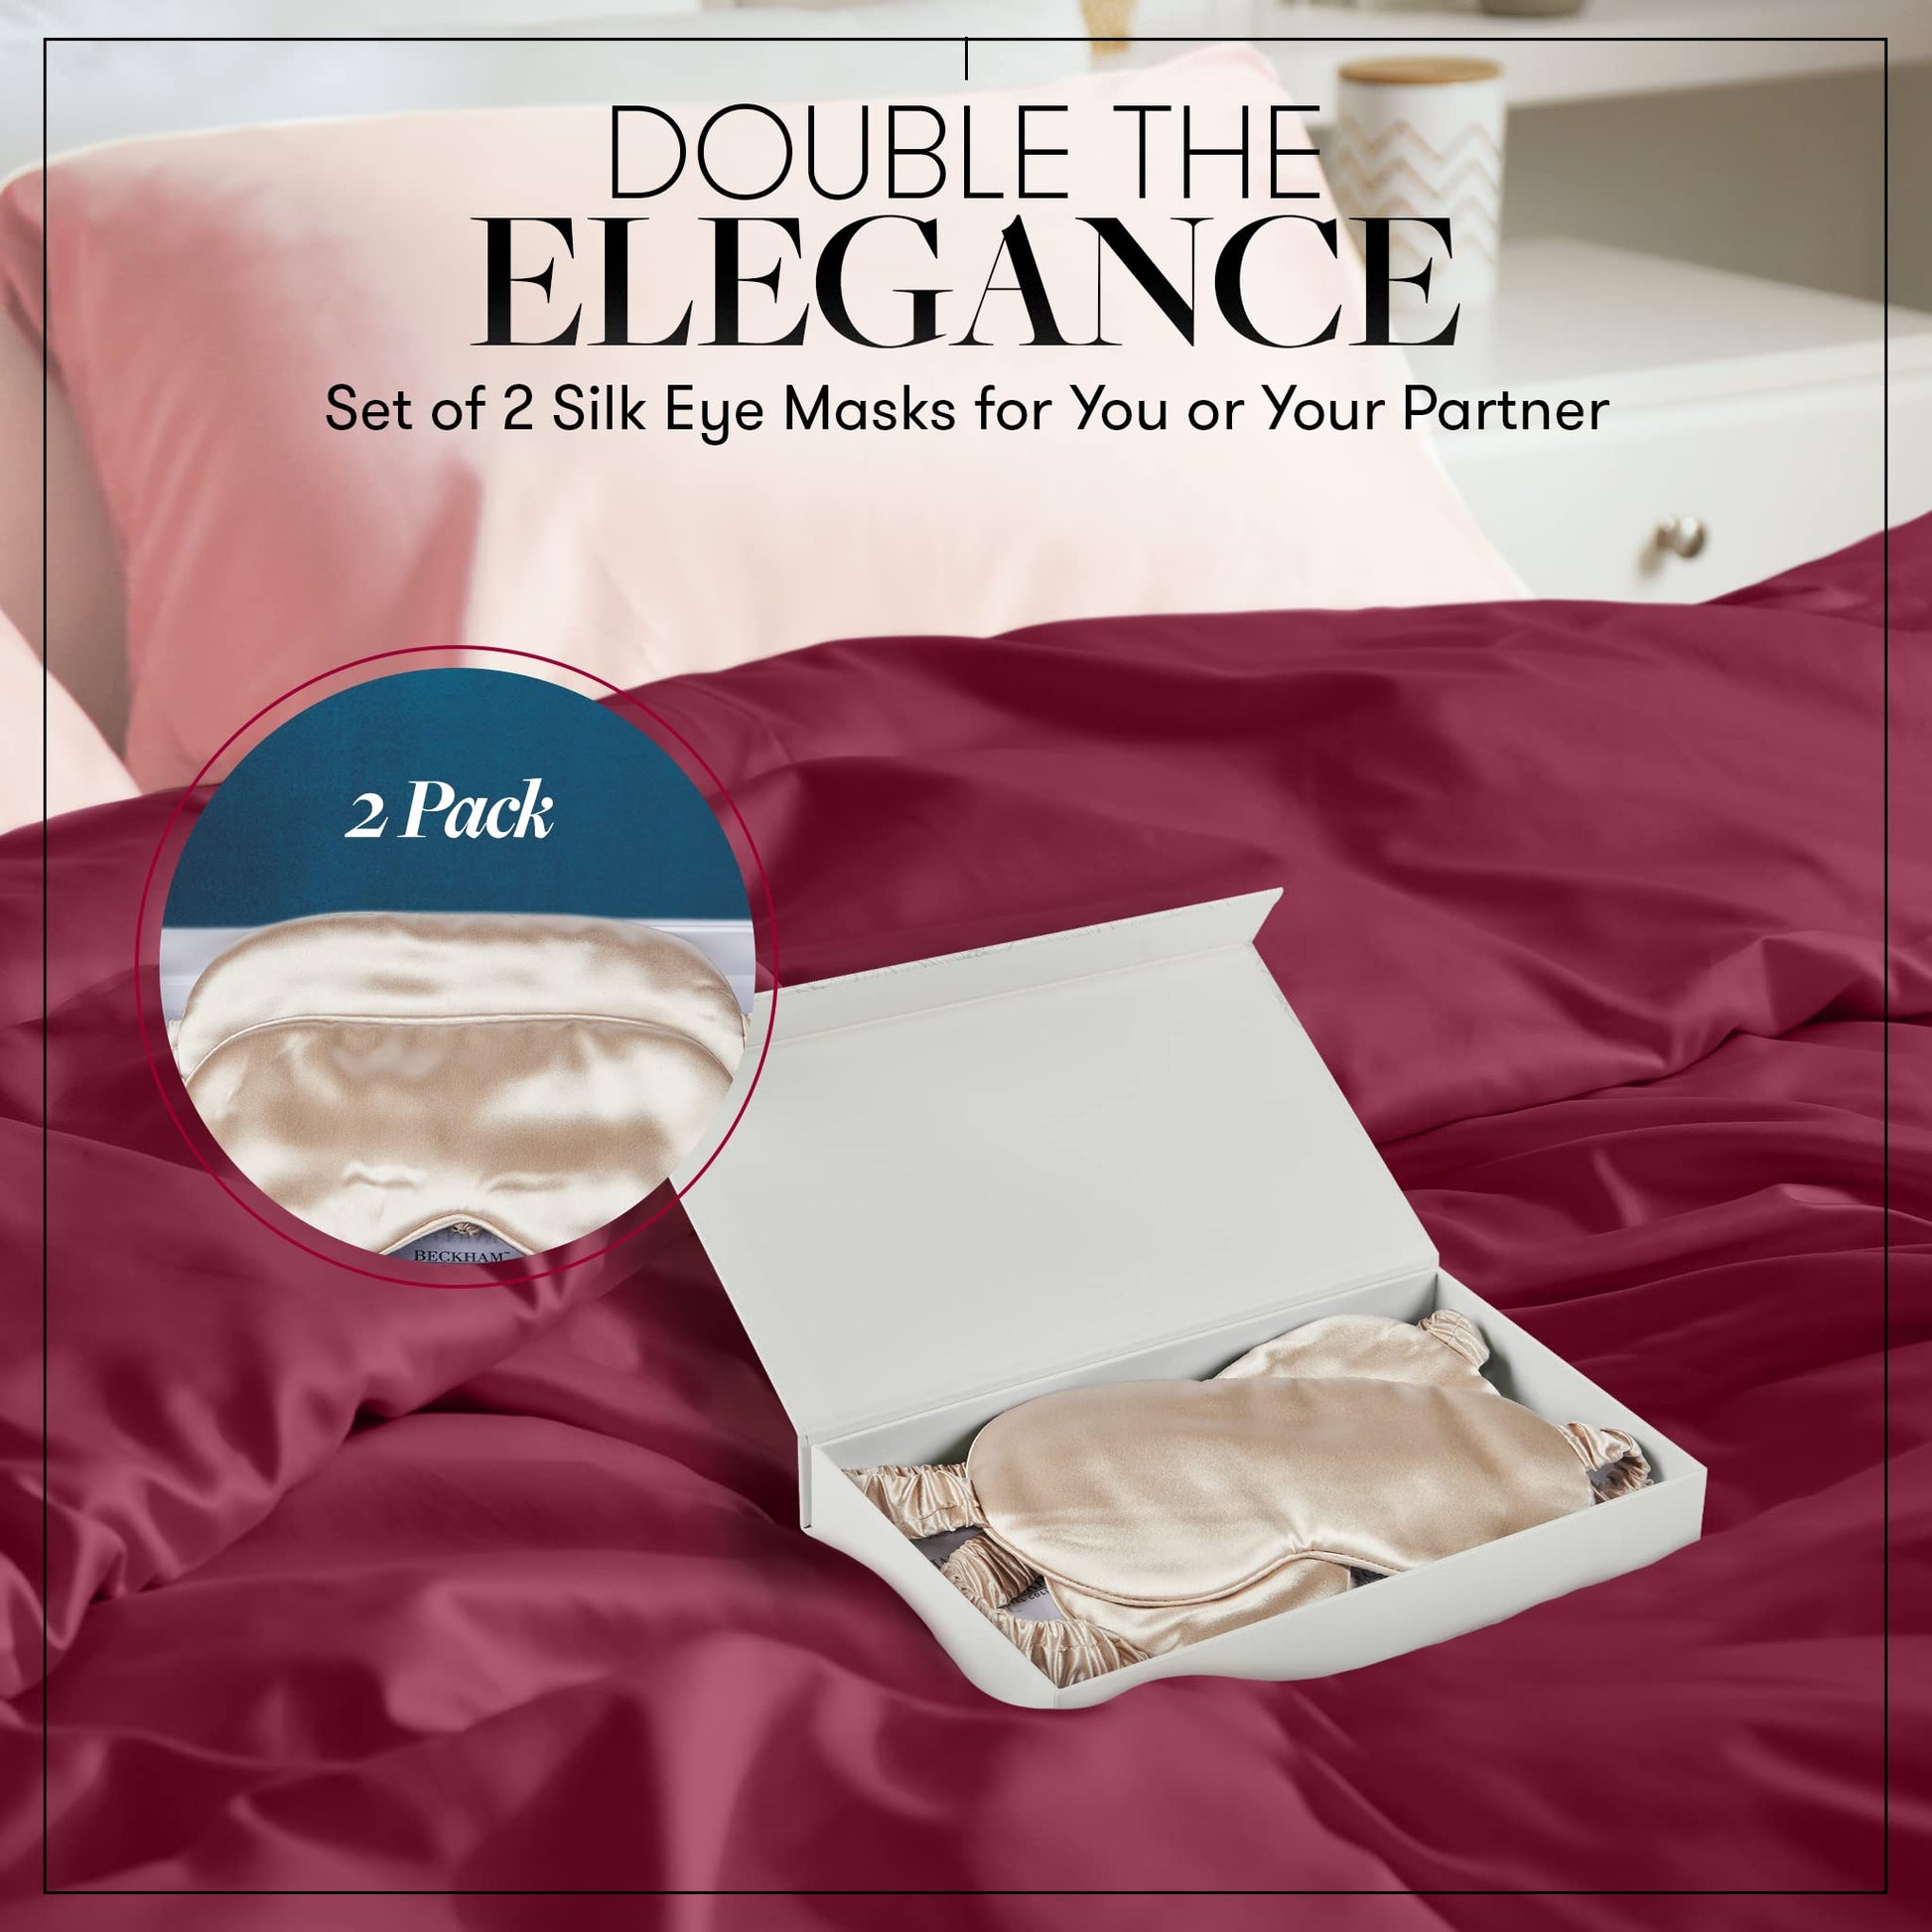  Beckham Hotel Collection Silk Pillowcase for Hair and Skin -  Pack of 2 Standard Size Silk Pillow Cases for Frizz, Split Ends and Acne  Control : Beauty & Personal Care